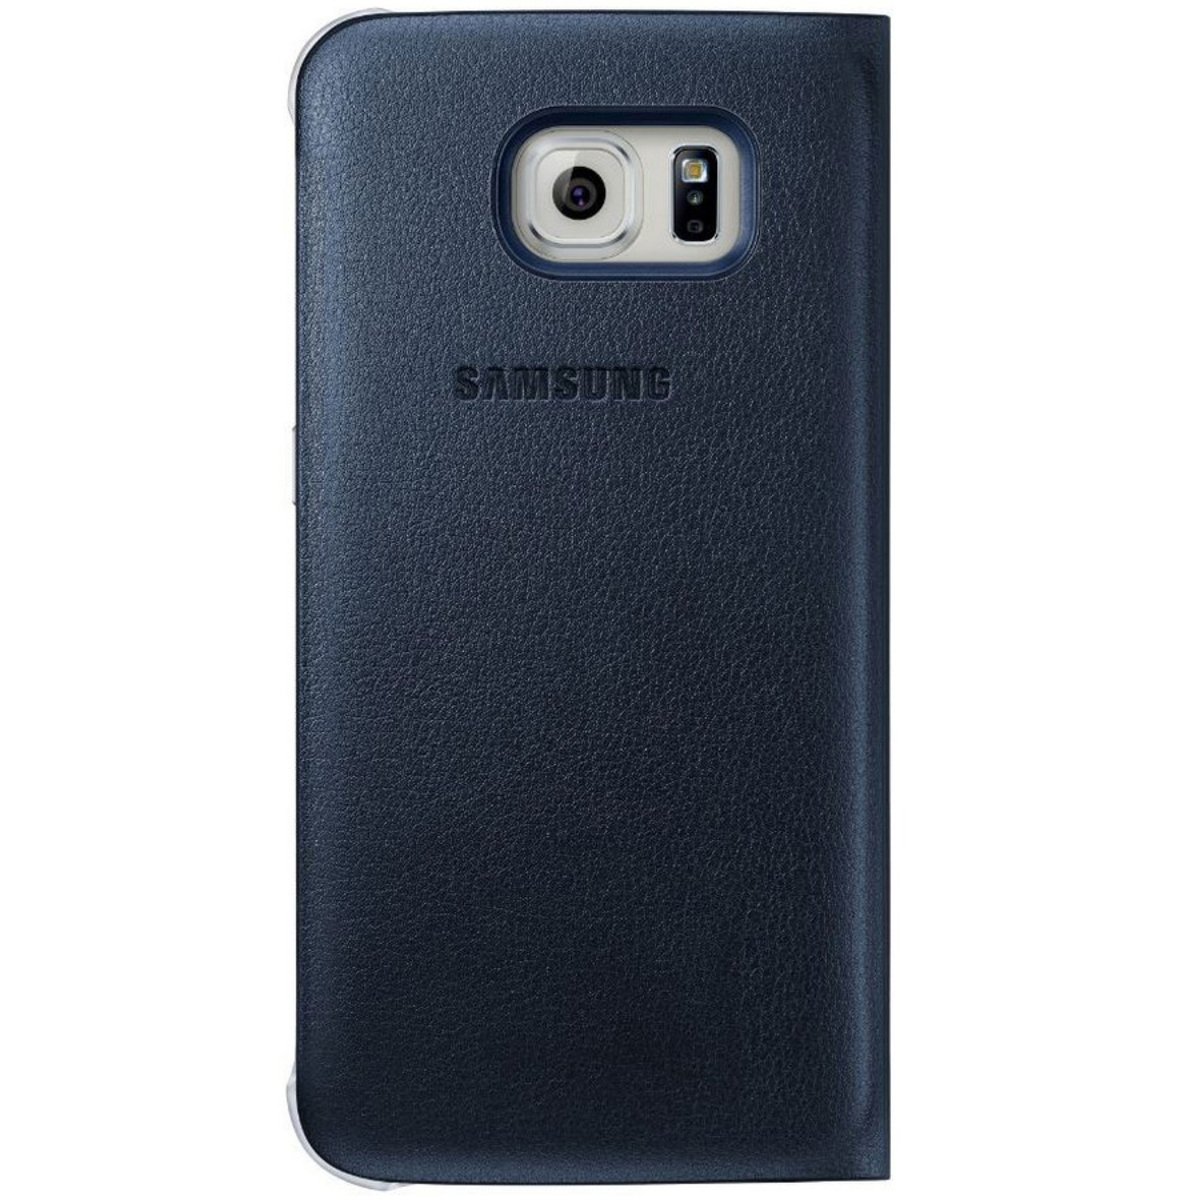 Samsung Galaxy S6 S-View Cover Black